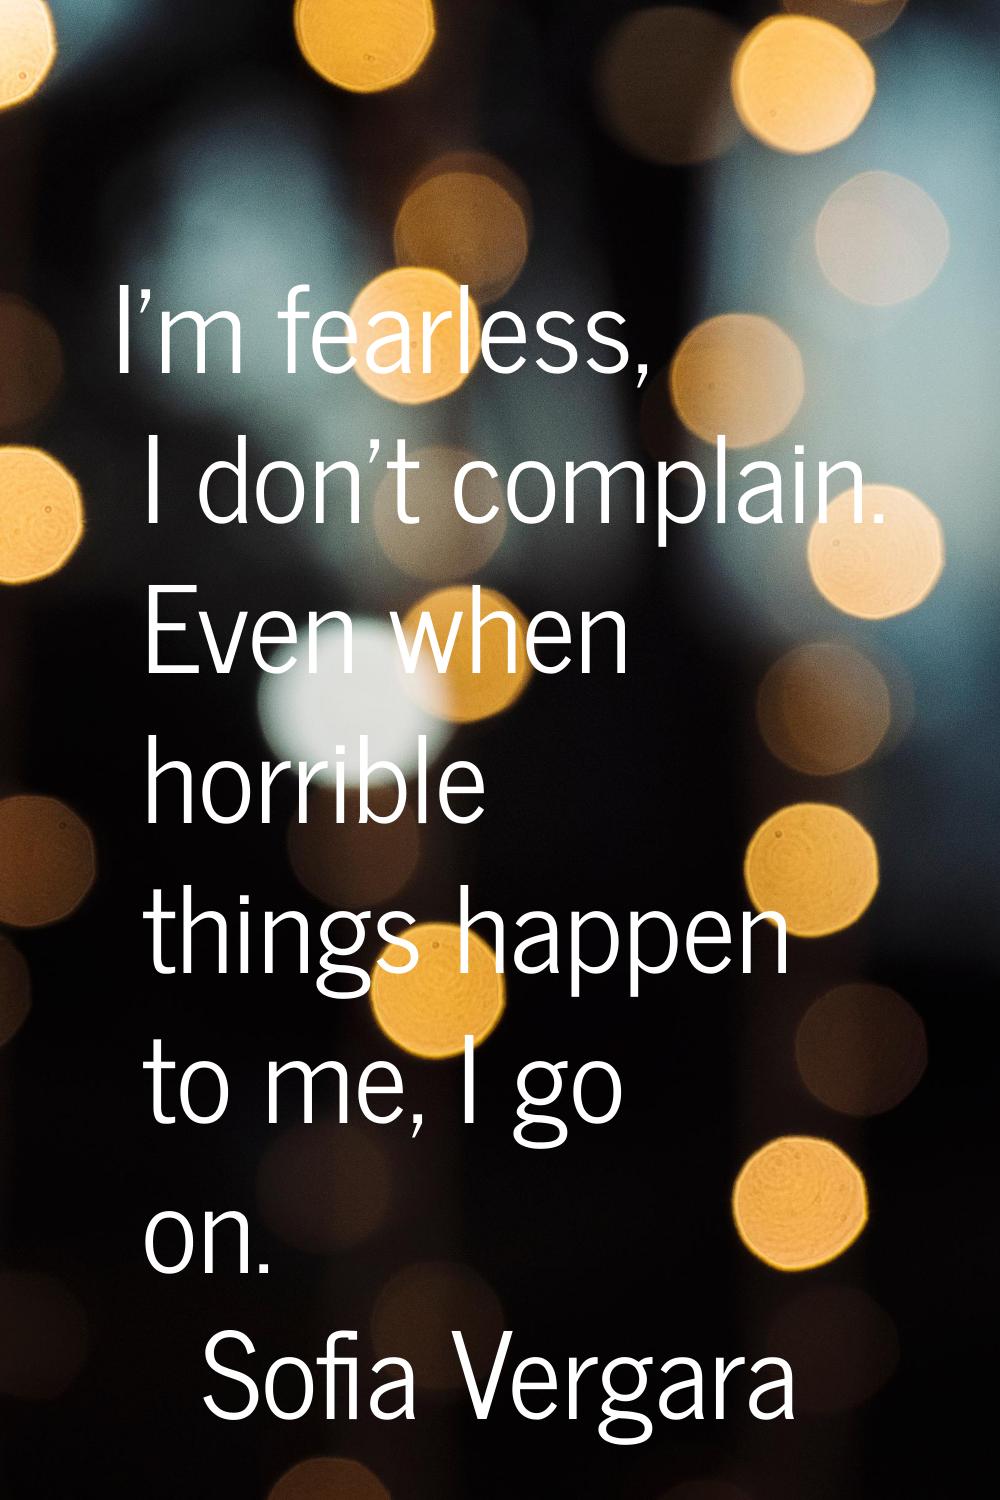 I'm fearless, I don't complain. Even when horrible things happen to me, I go on.